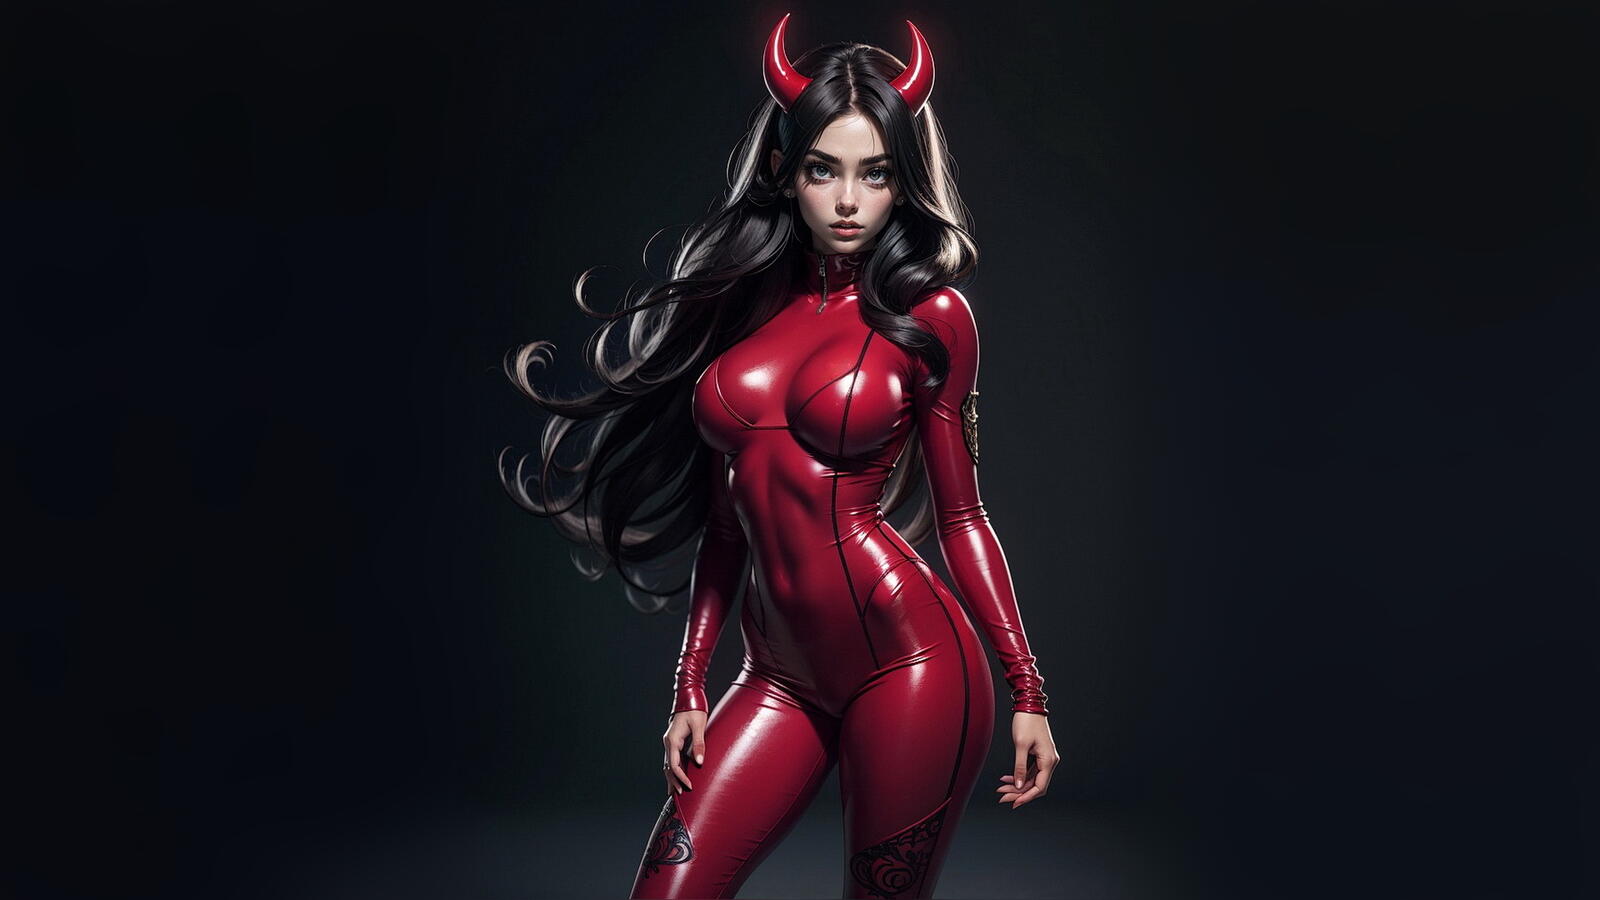 Free photo Demon girl with black hair and red suit on dark background